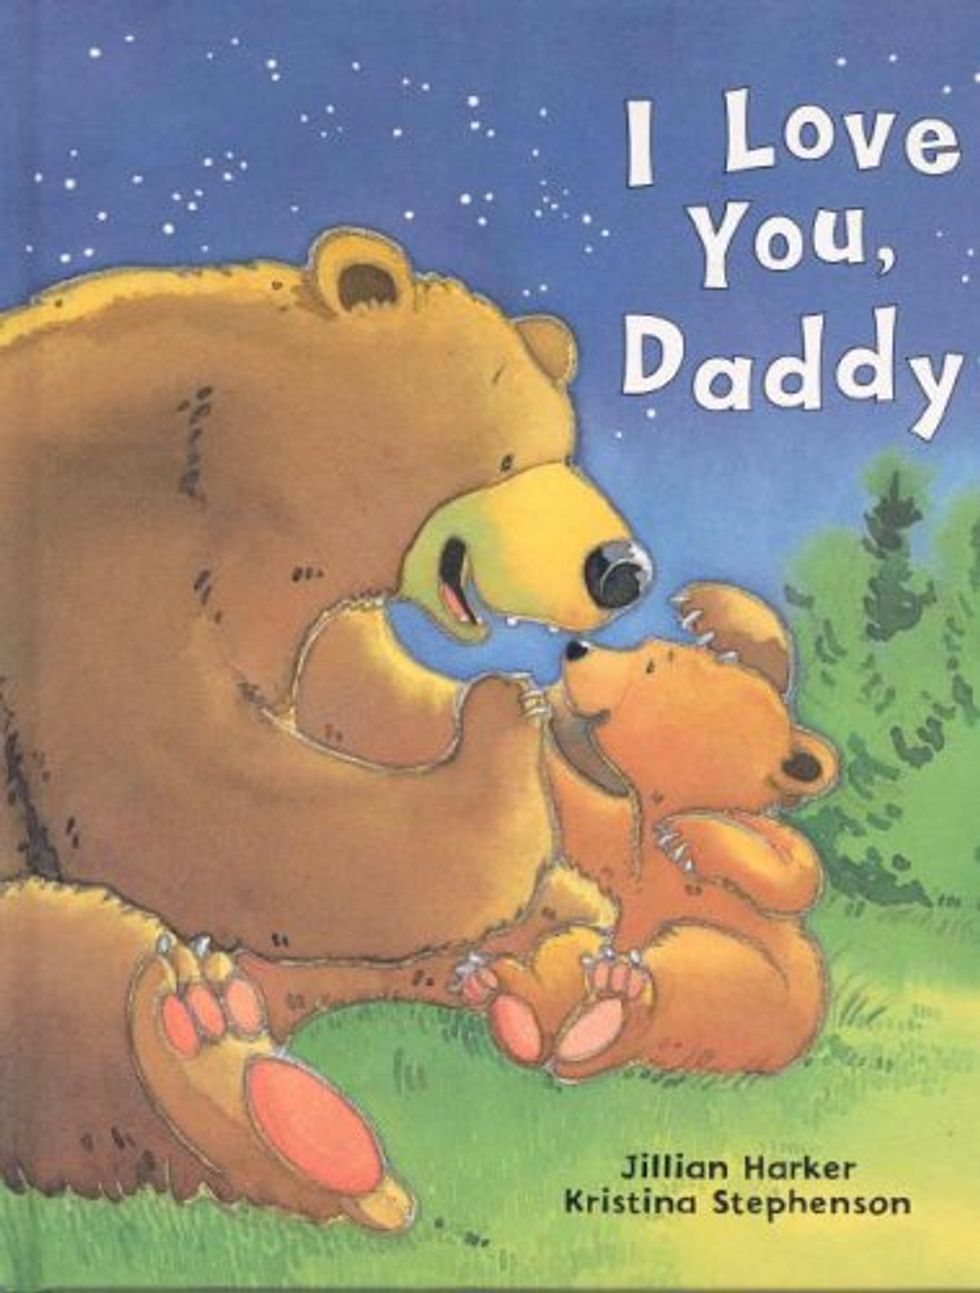 cover image of i love you daddy, one of motherly's favorite dad baby books